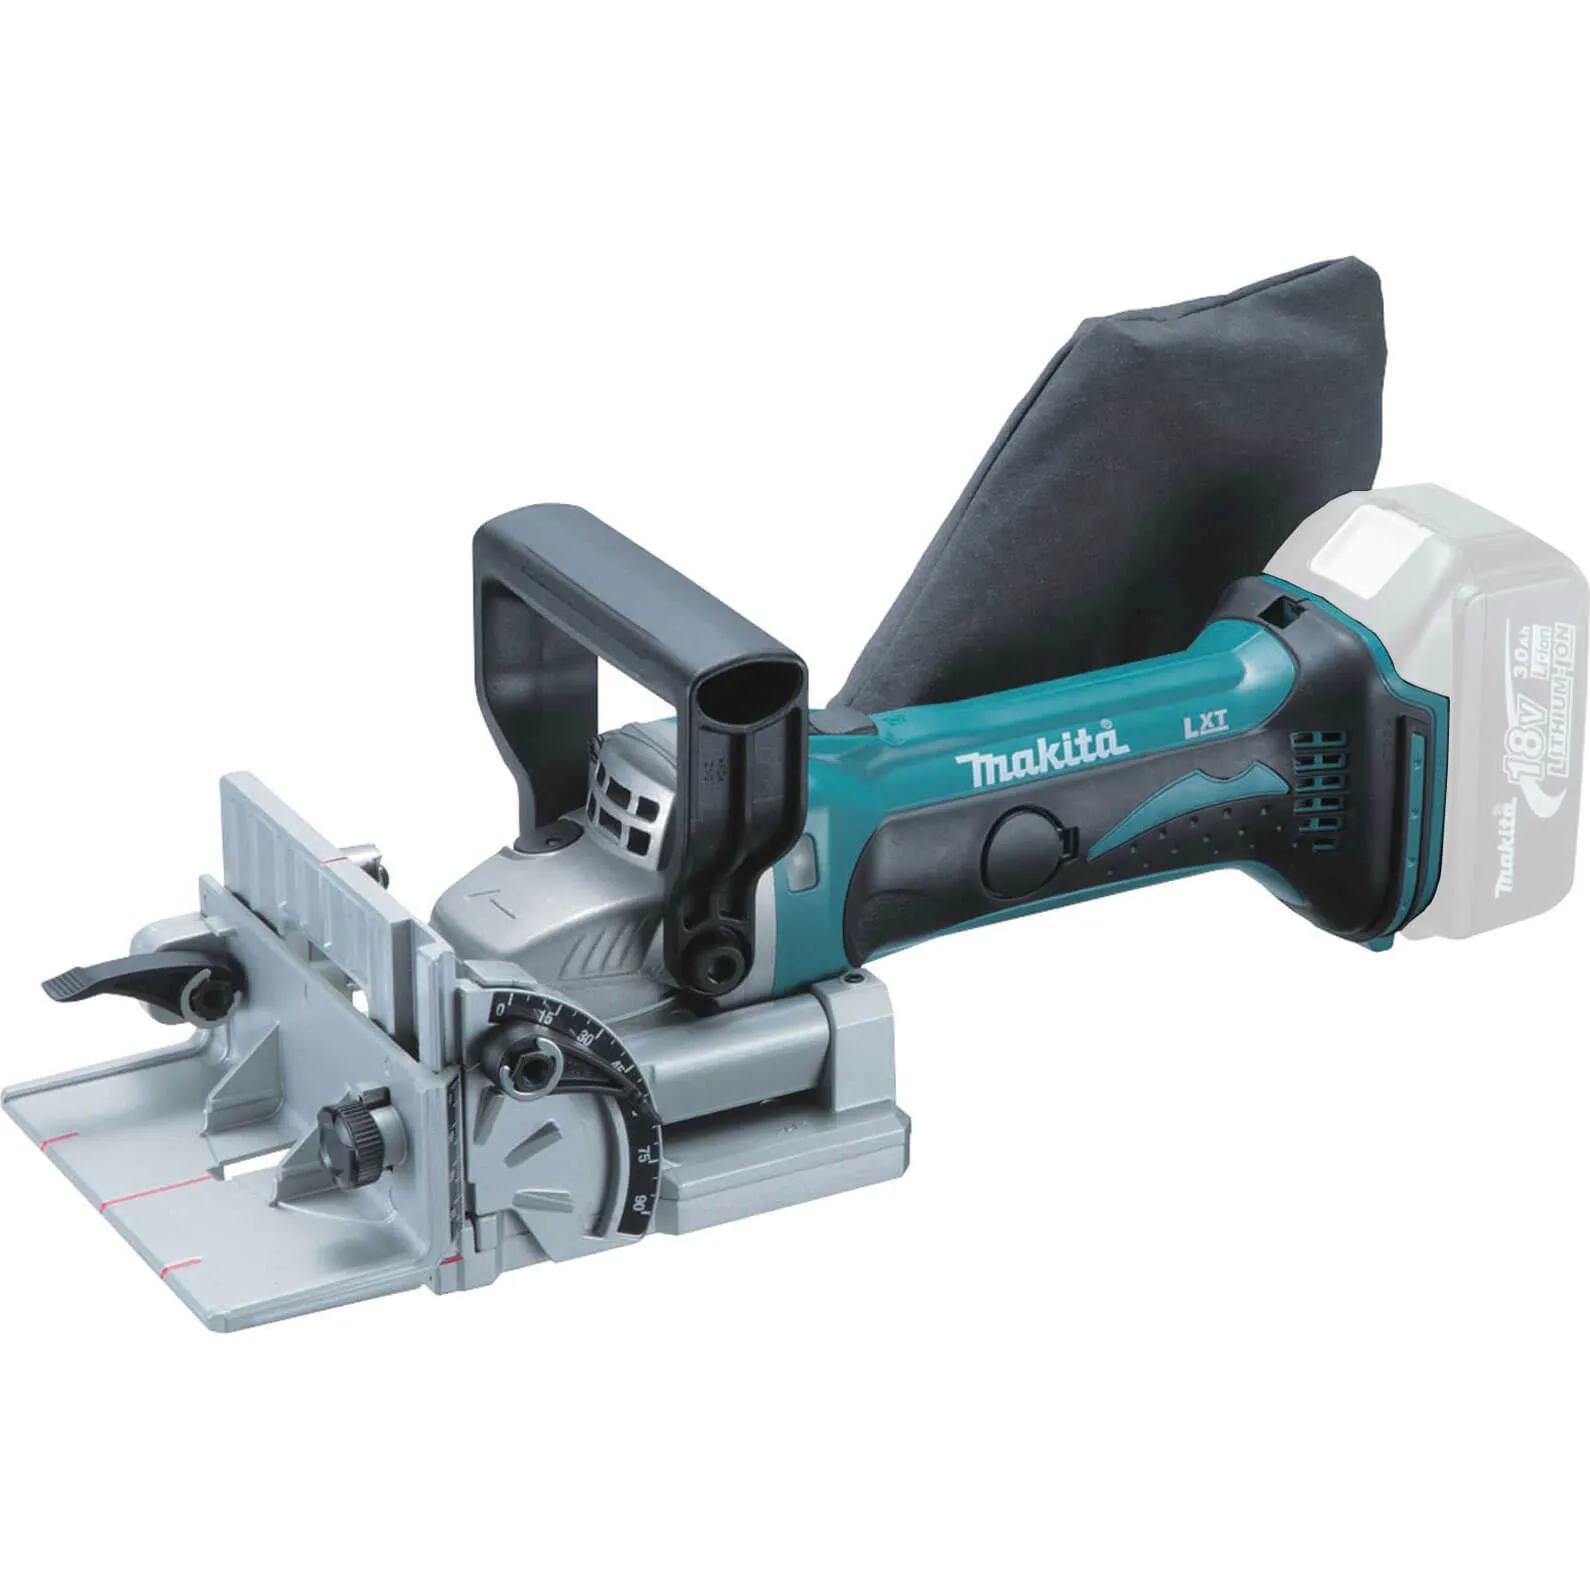 Makita DPJ180 18v Cordless LXT Biscuit Jointer - No Batteries, No Charger, No Case